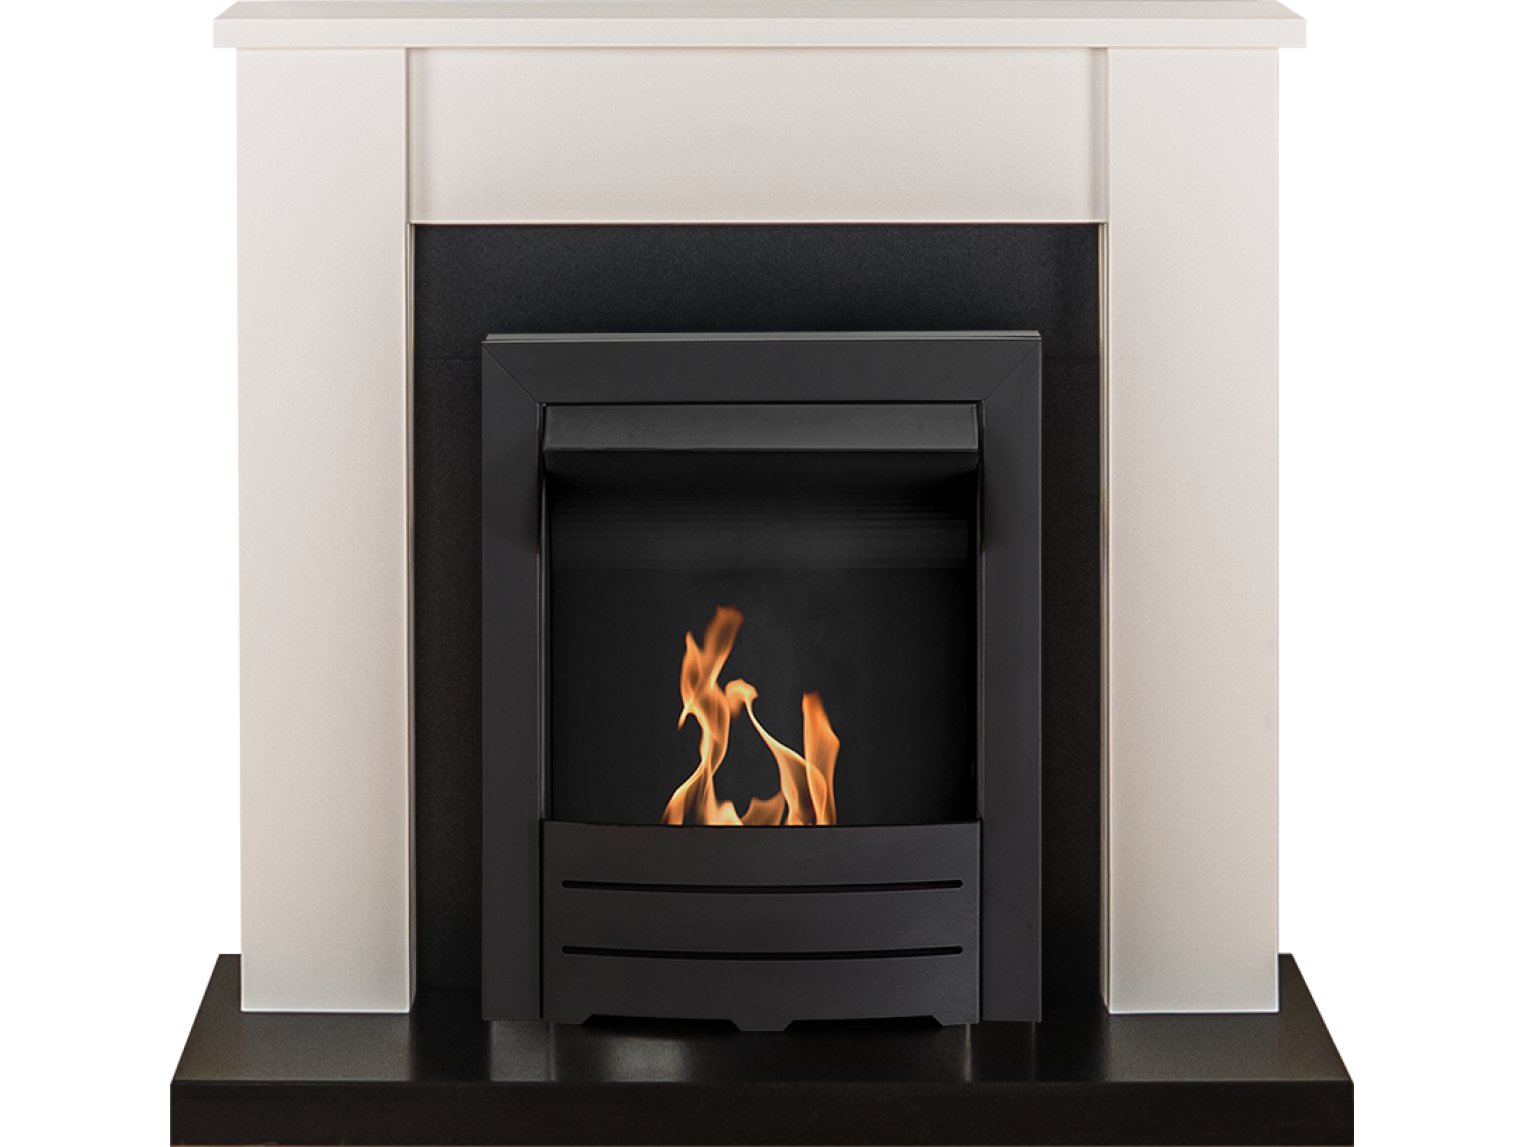 Adam Solus Fireplace Suite in Black & White with Colorado Bio Ethanol Fire in Black, 39 Inch